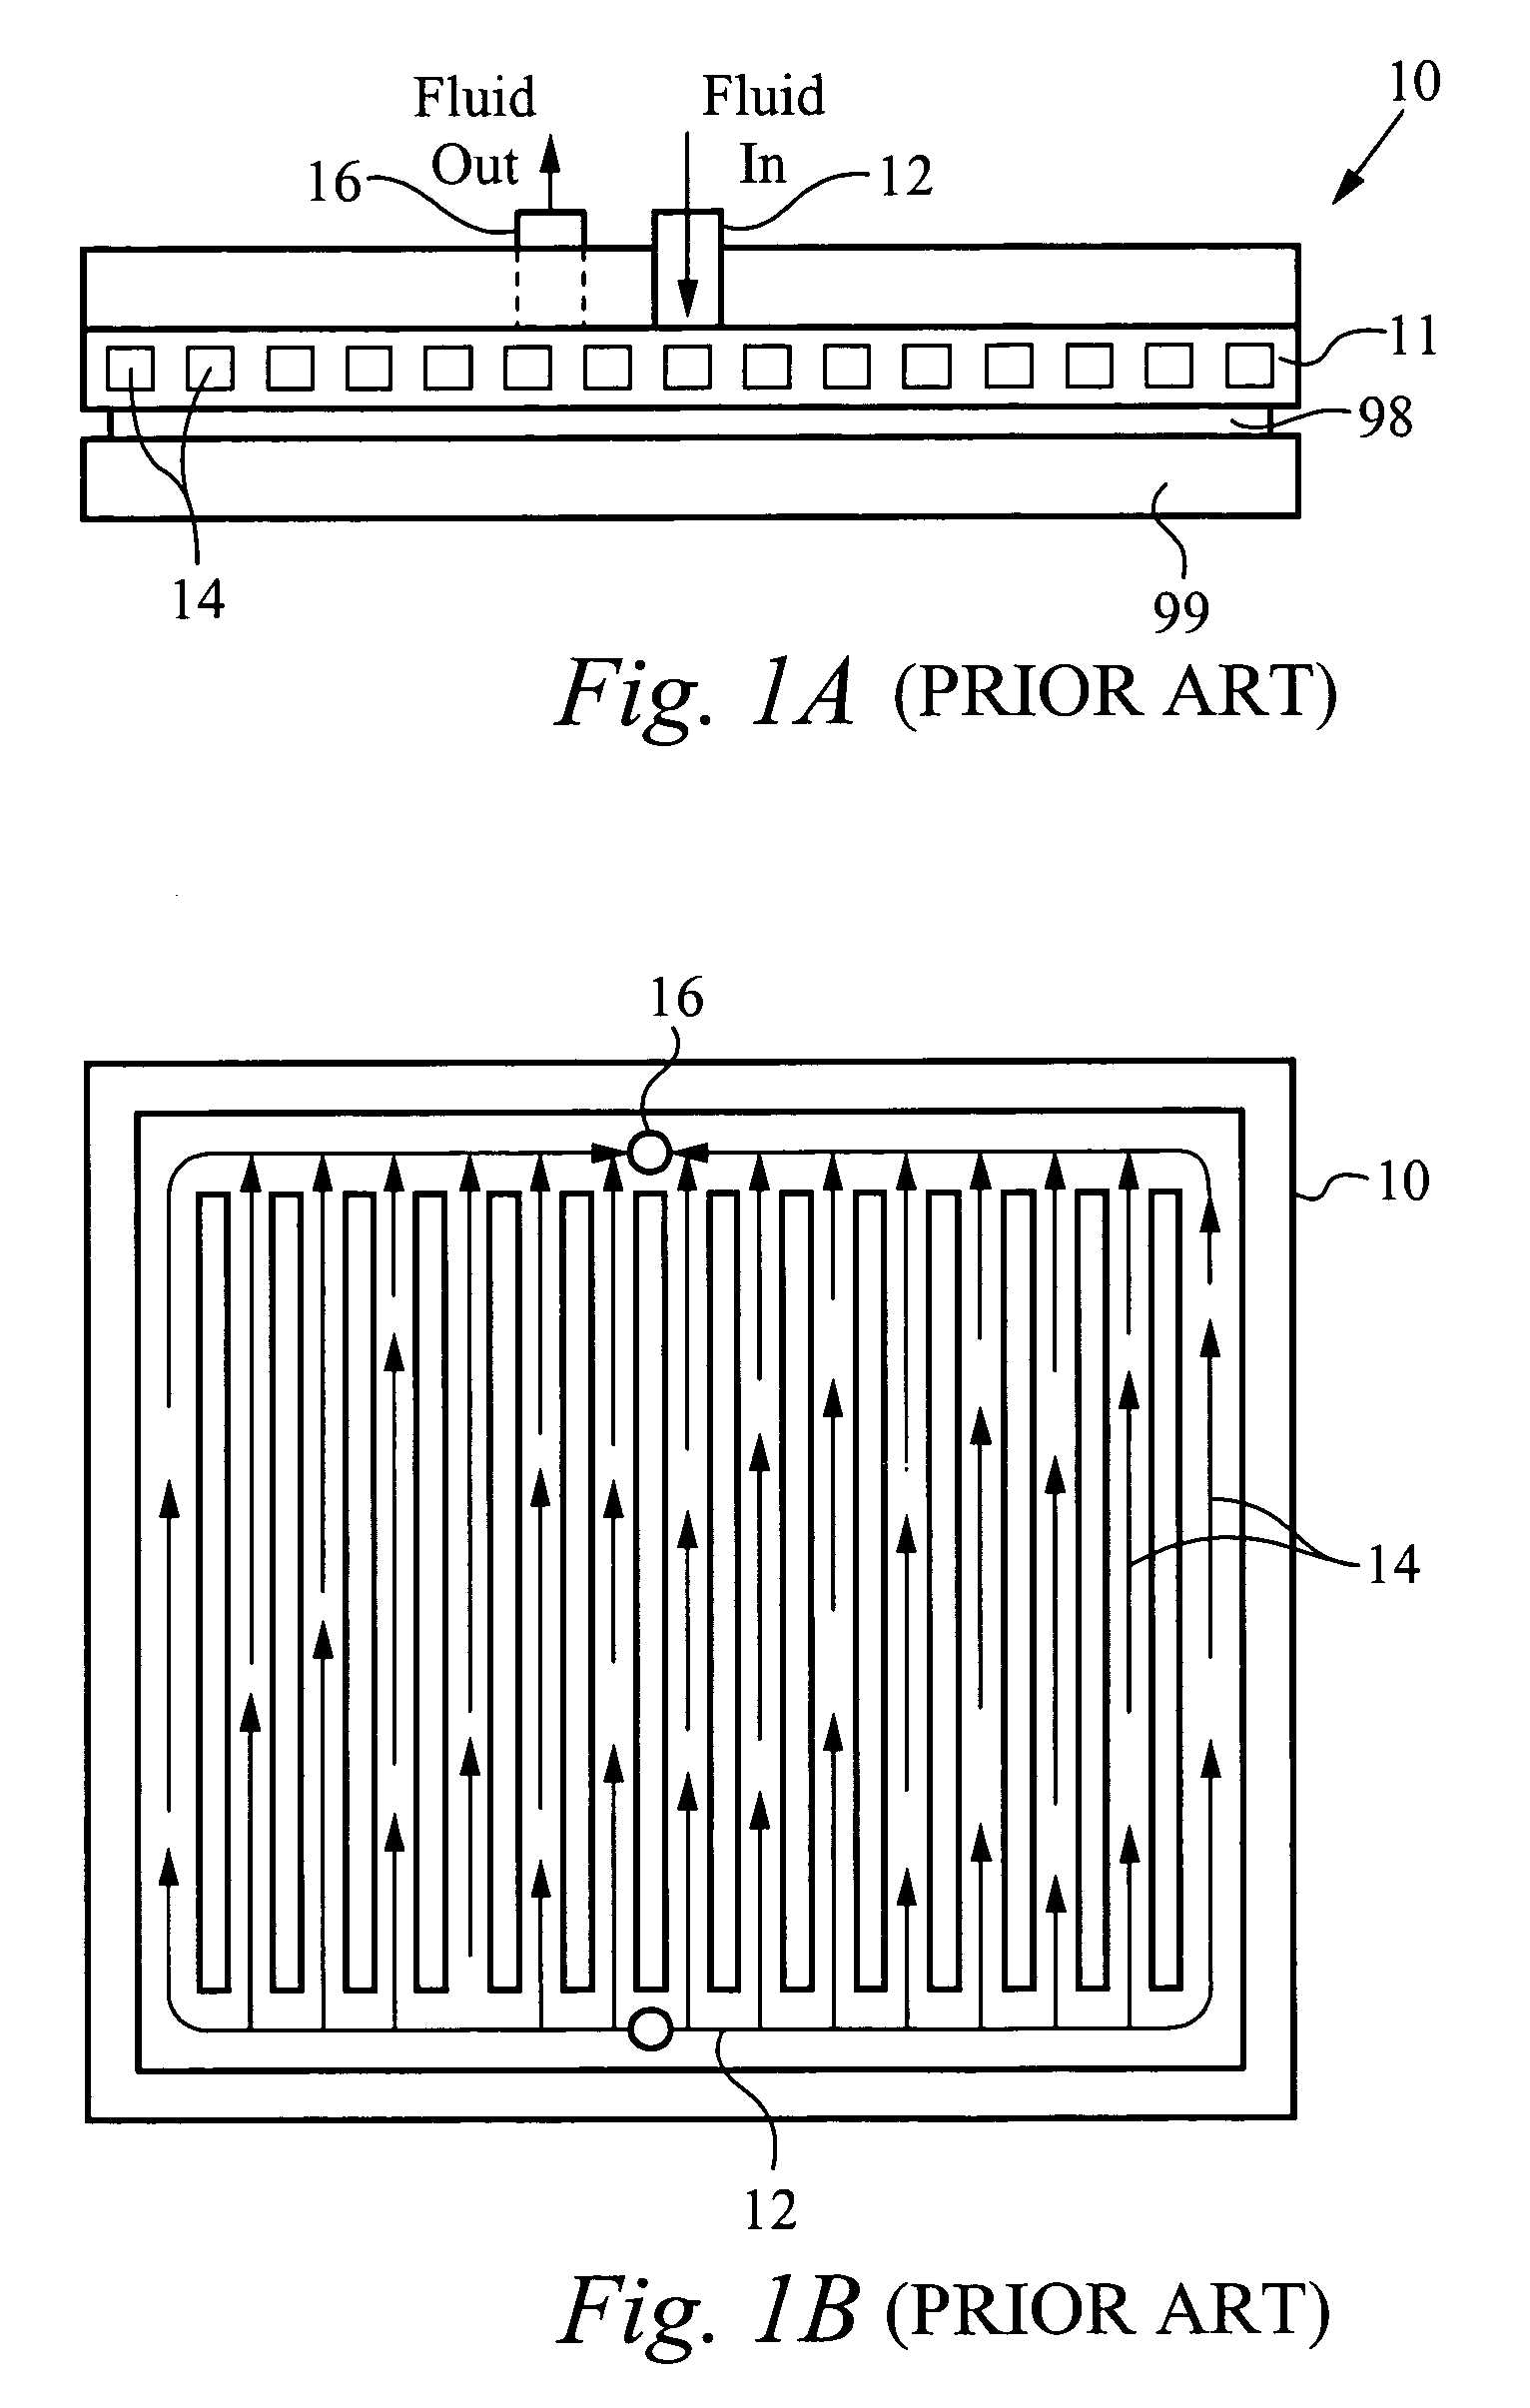 Apparatus and method of efficient fluid delivery for cooling a heat producing device